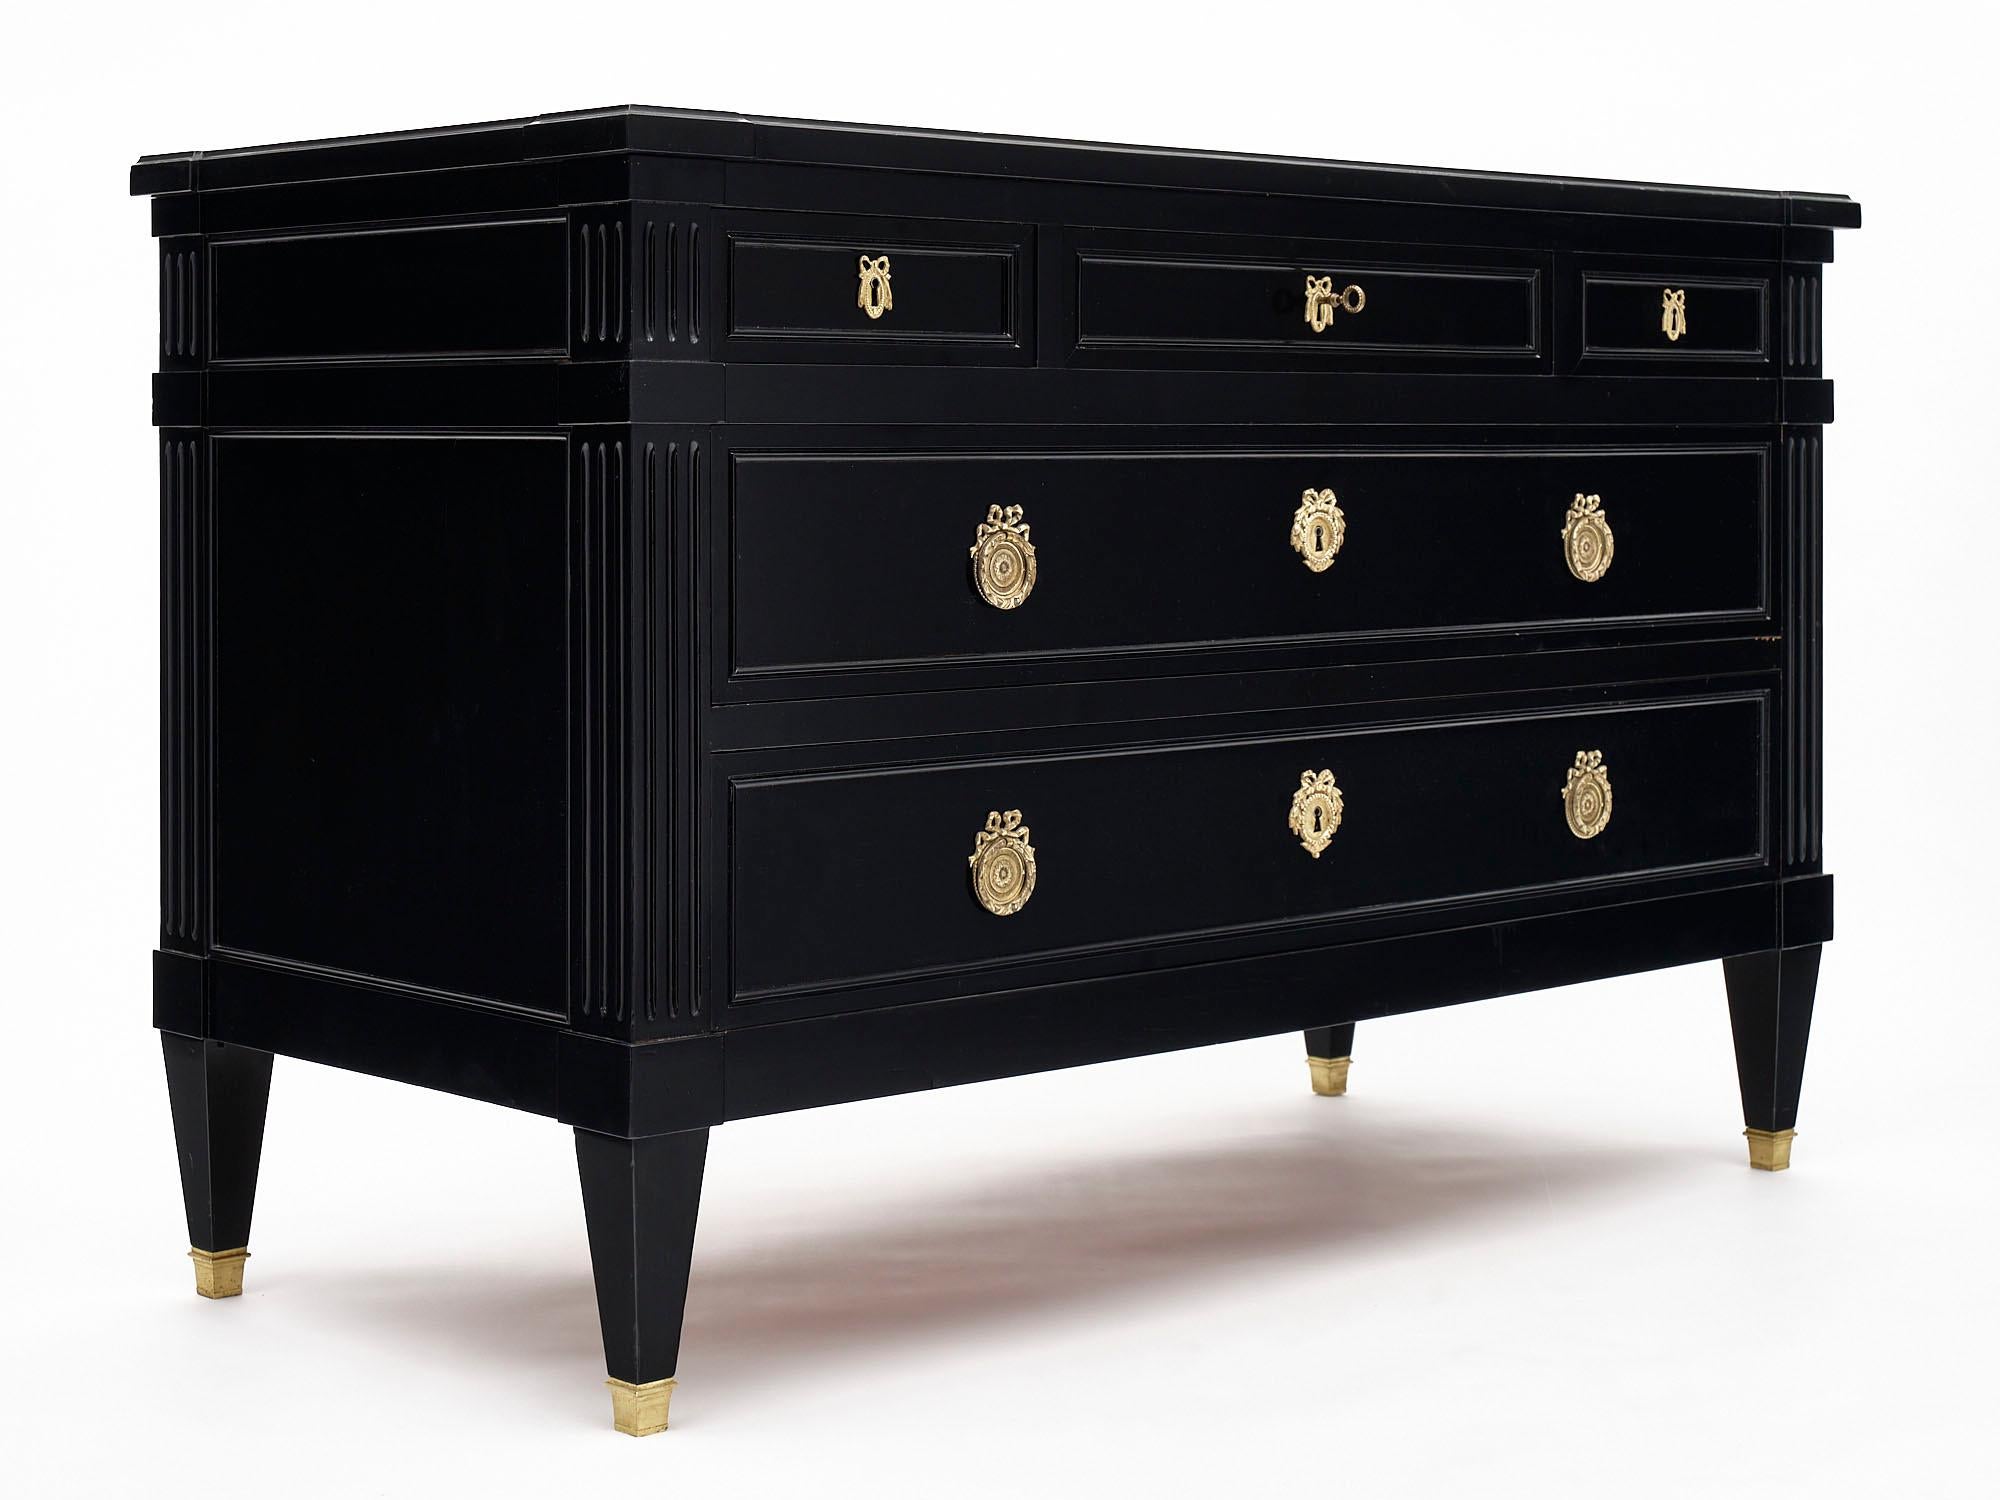 Louis XVI style grand chest of drawers from France made of solid cherrywood that has been ebonized and finished in a lustrous French polish. We love the brass hardware and capped feet as well! There are three dovetailed drawers above two lower